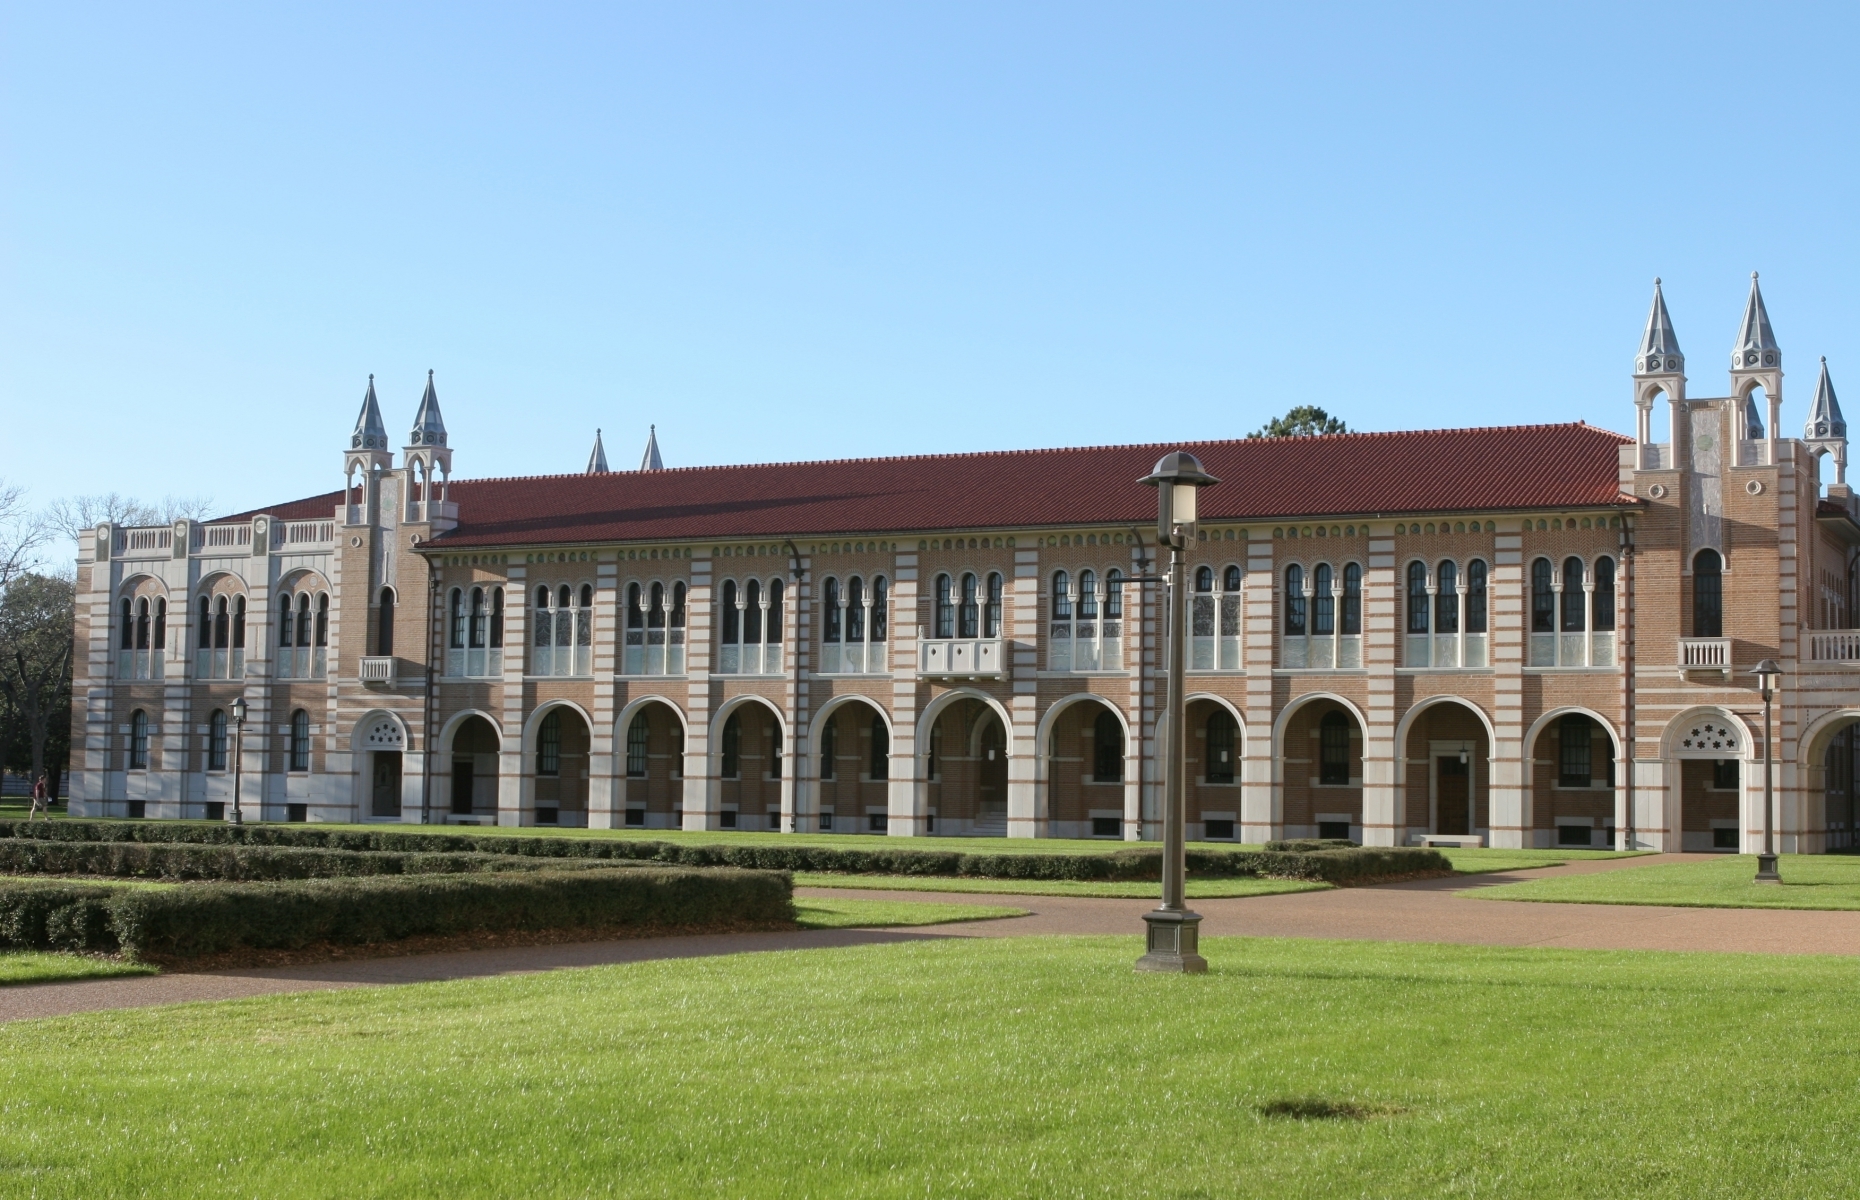 <p><a href="http://www.rice.edu/virtualtours/" rel="noreferrer noopener">Rice University</a> is spread across 300 wooded acres in the middle of Houston and has an impeccably groomed quad surrounded by neo-Byzantine–style buildings.</p>